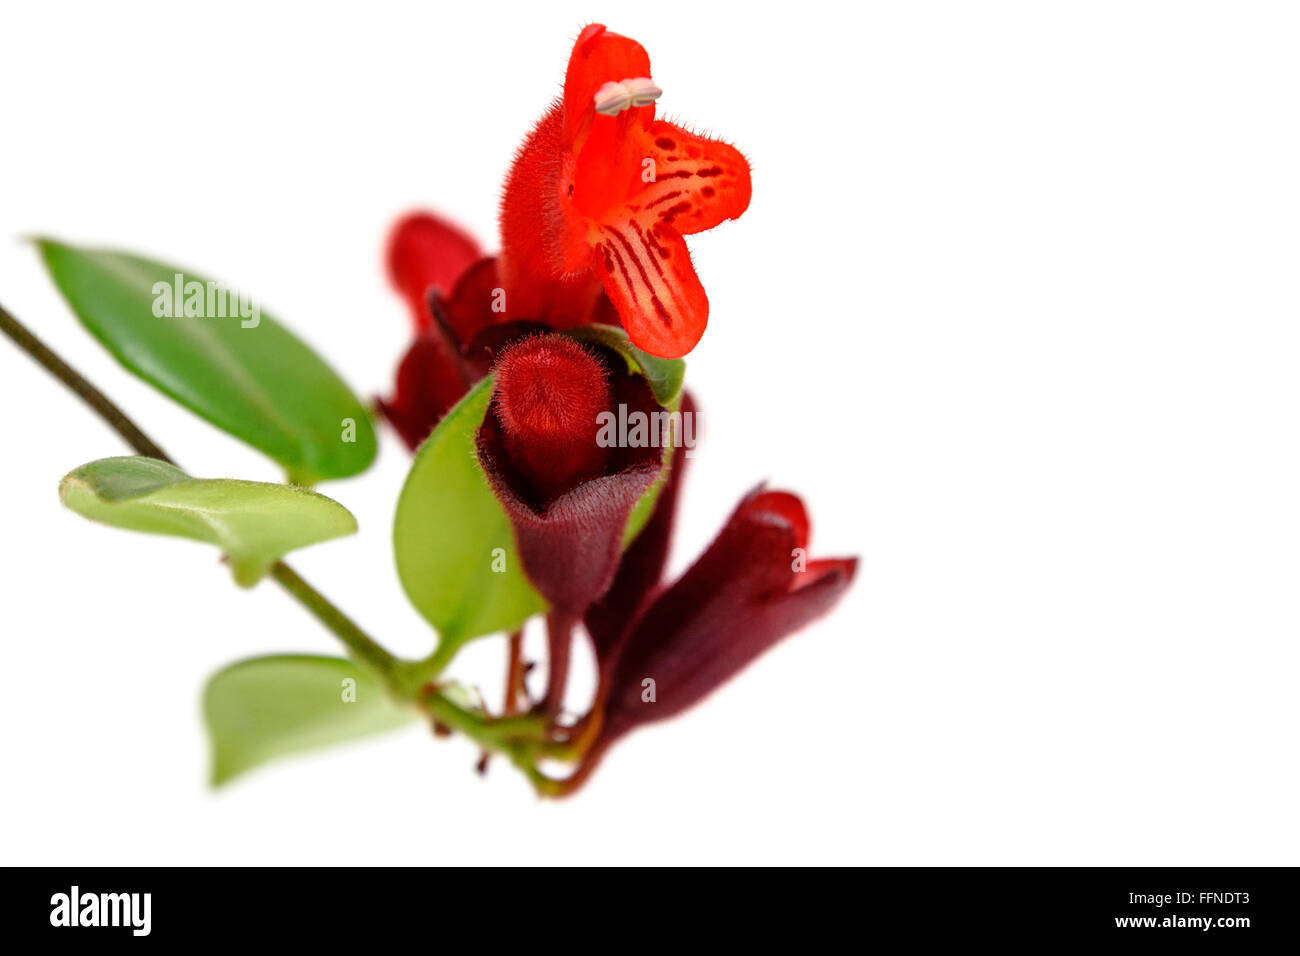 Red Lipstick flower. Aeschynanthus radicans. Isolated on white background Stock Photo